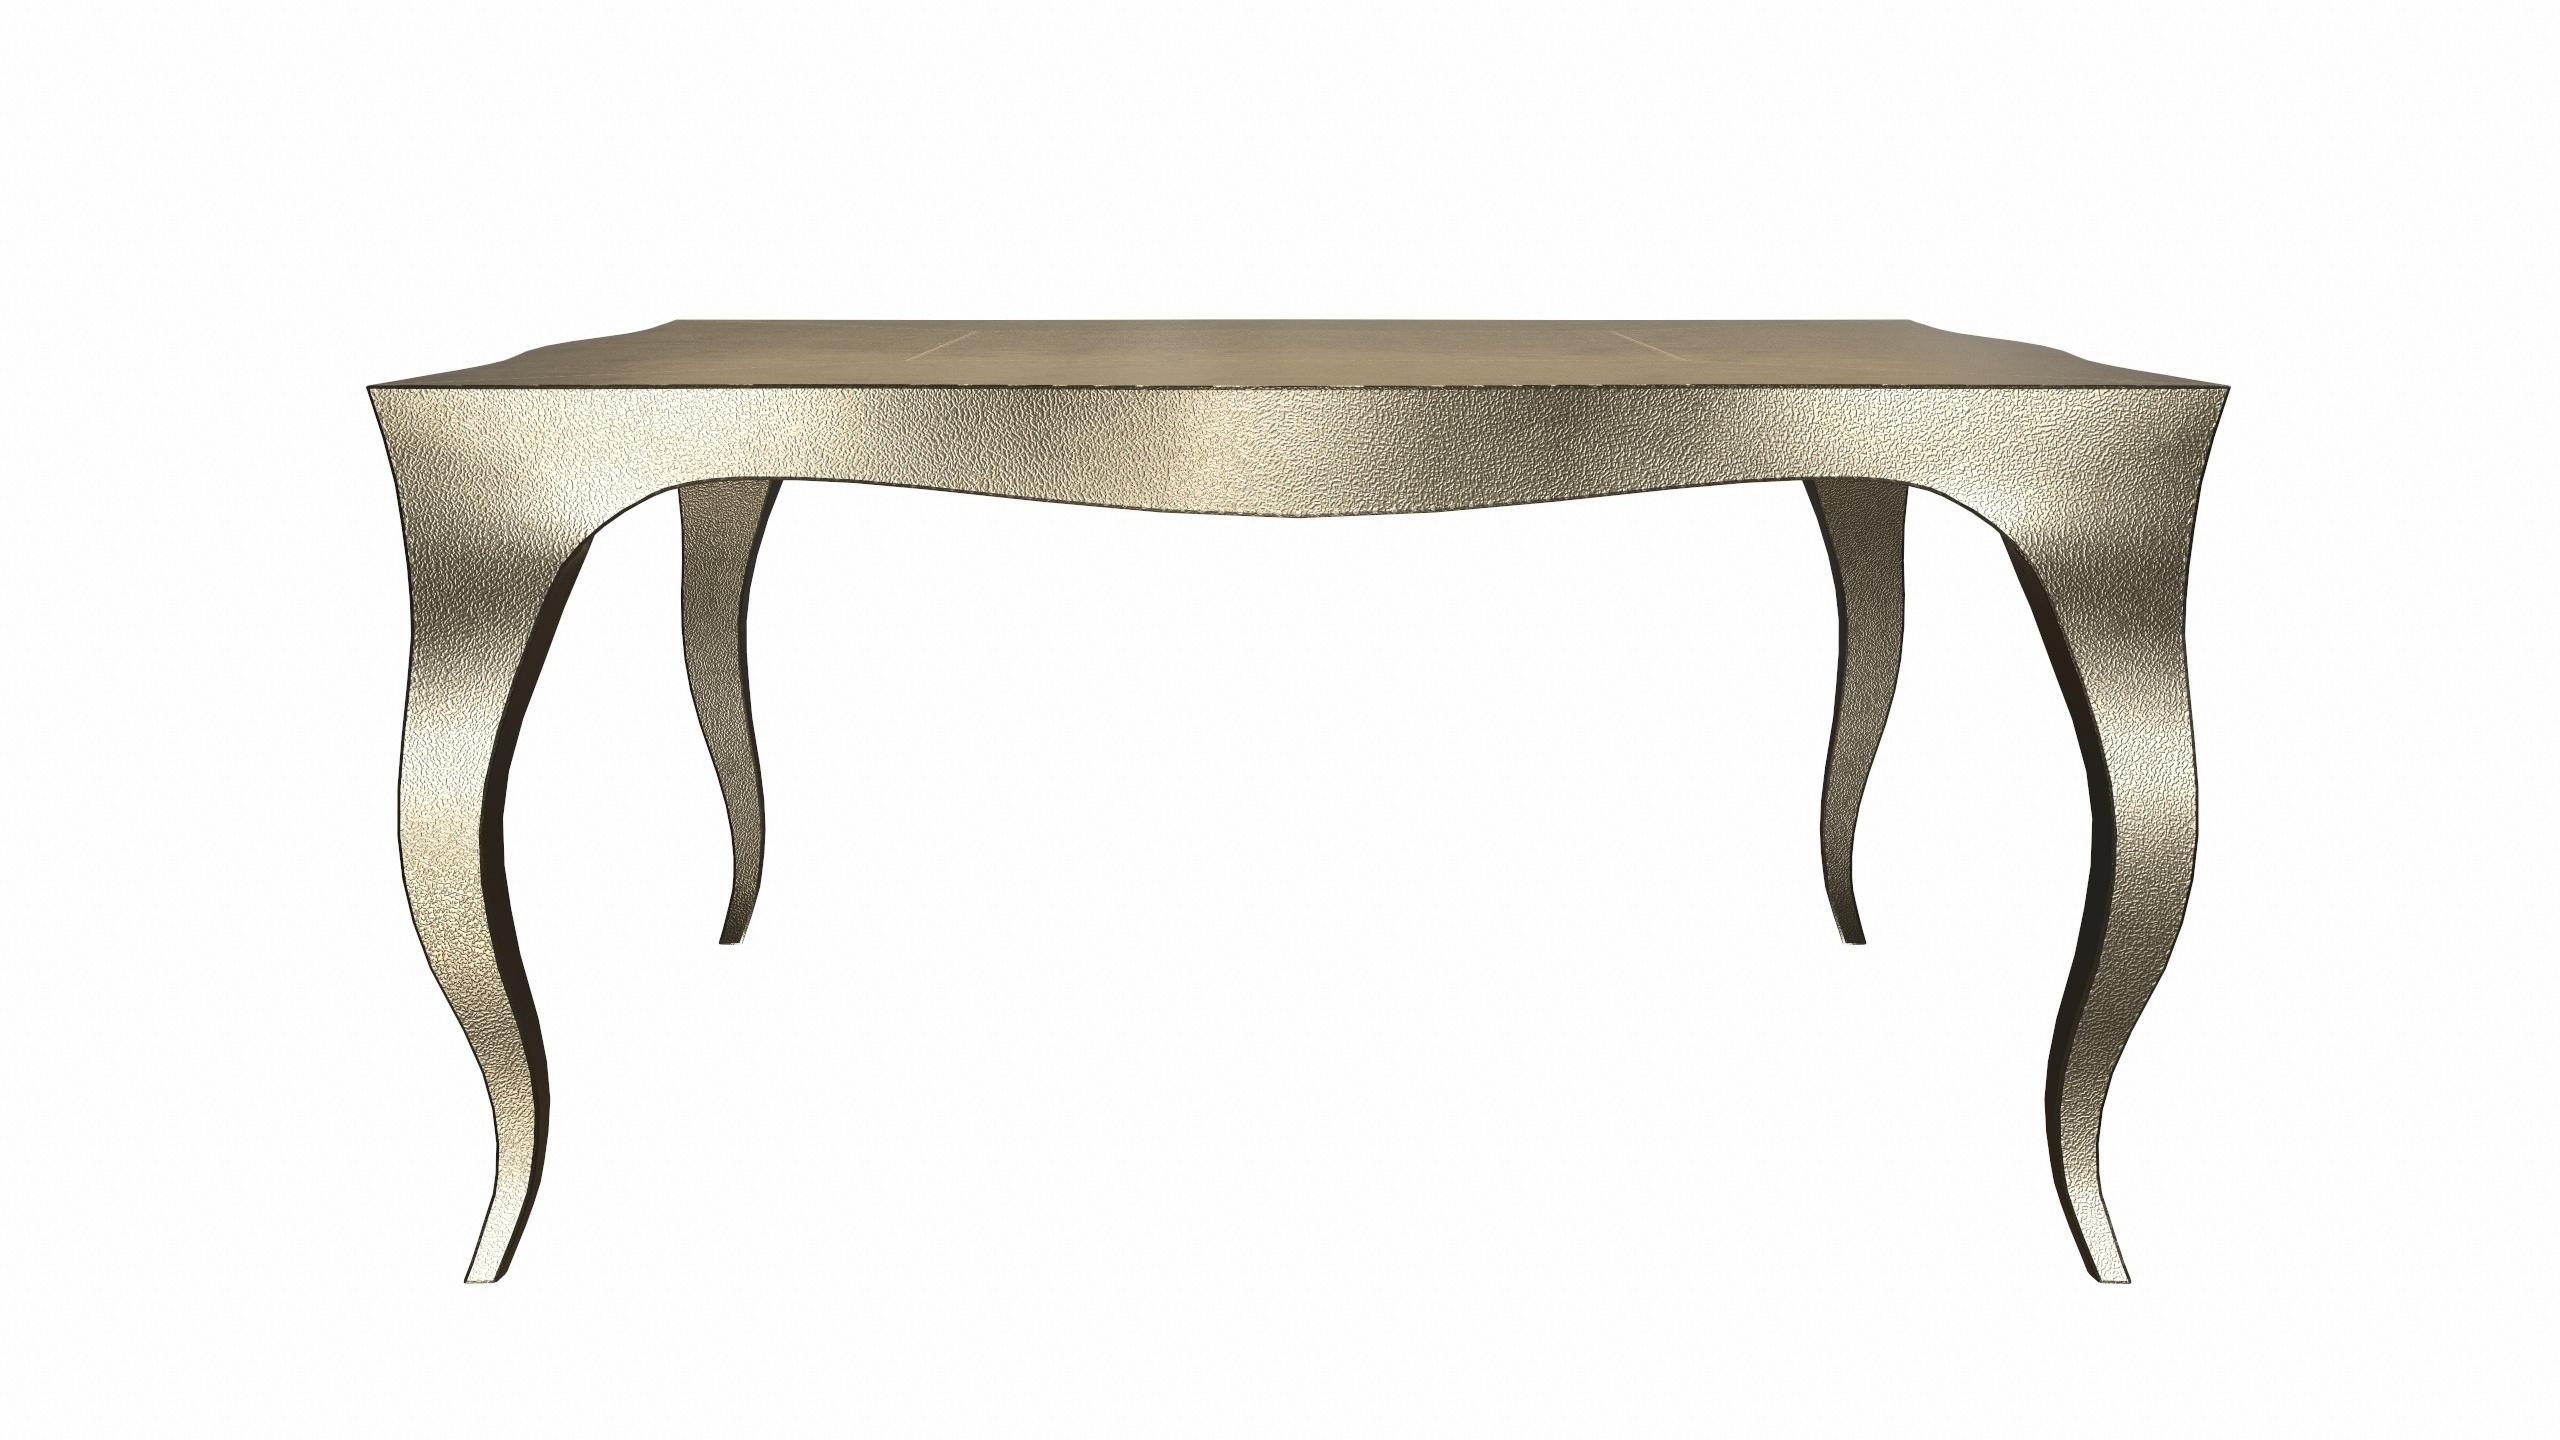 American Louise Art Deco Game Tables Fine Hammered Brass by Paul Mathieu for S.Odegard For Sale